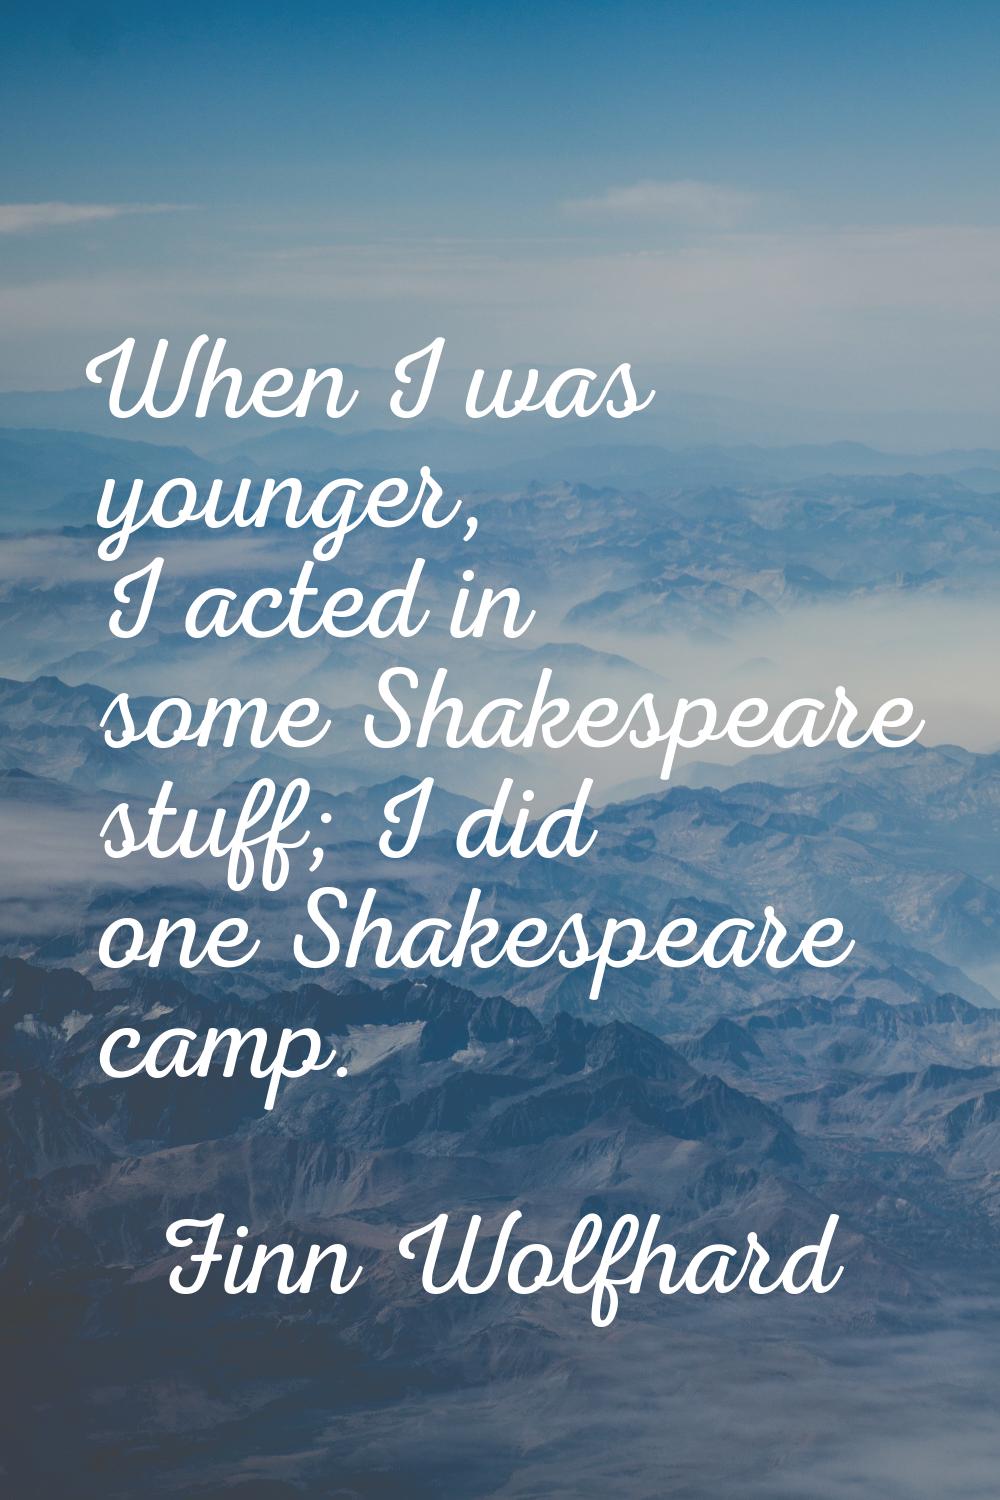 When I was younger, I acted in some Shakespeare stuff; I did one Shakespeare camp.